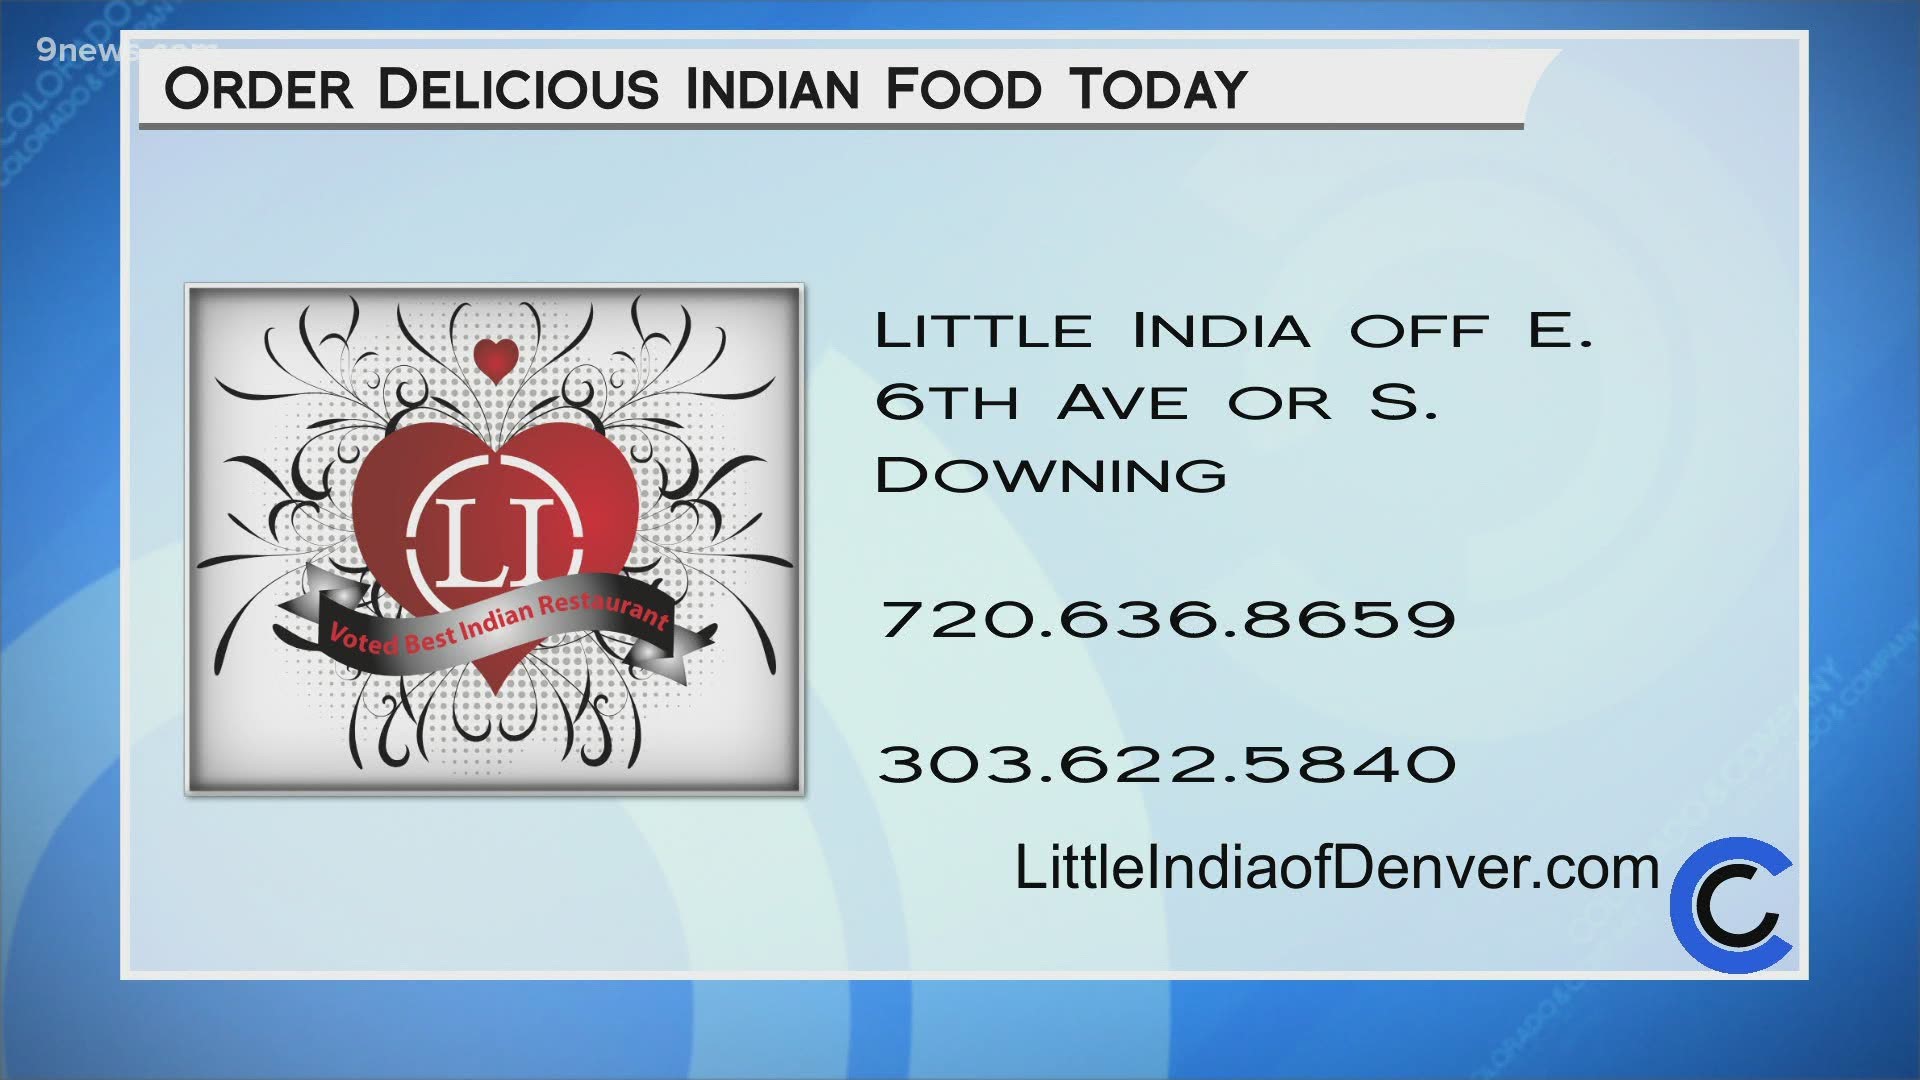 Little India of Denver is open for takeout and is planning on opening their Downing location soon! Place a to go order by calling 720.636.8659.